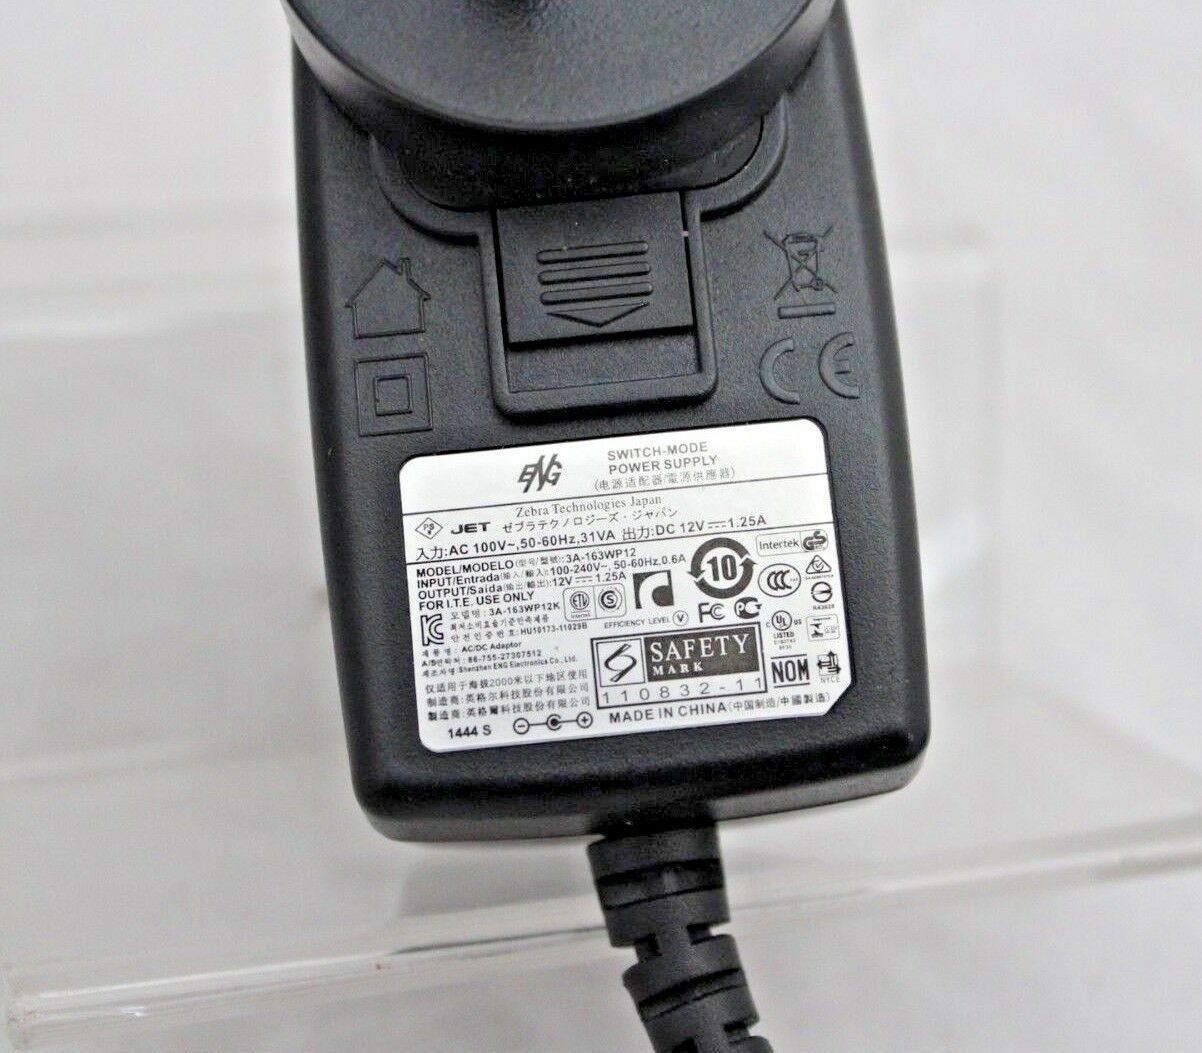 ENG Switch-Mode Power Supply Adapter Charger 3A-163WP12 12V 1.25A Features: Wall Charger Compatible Product Line: For